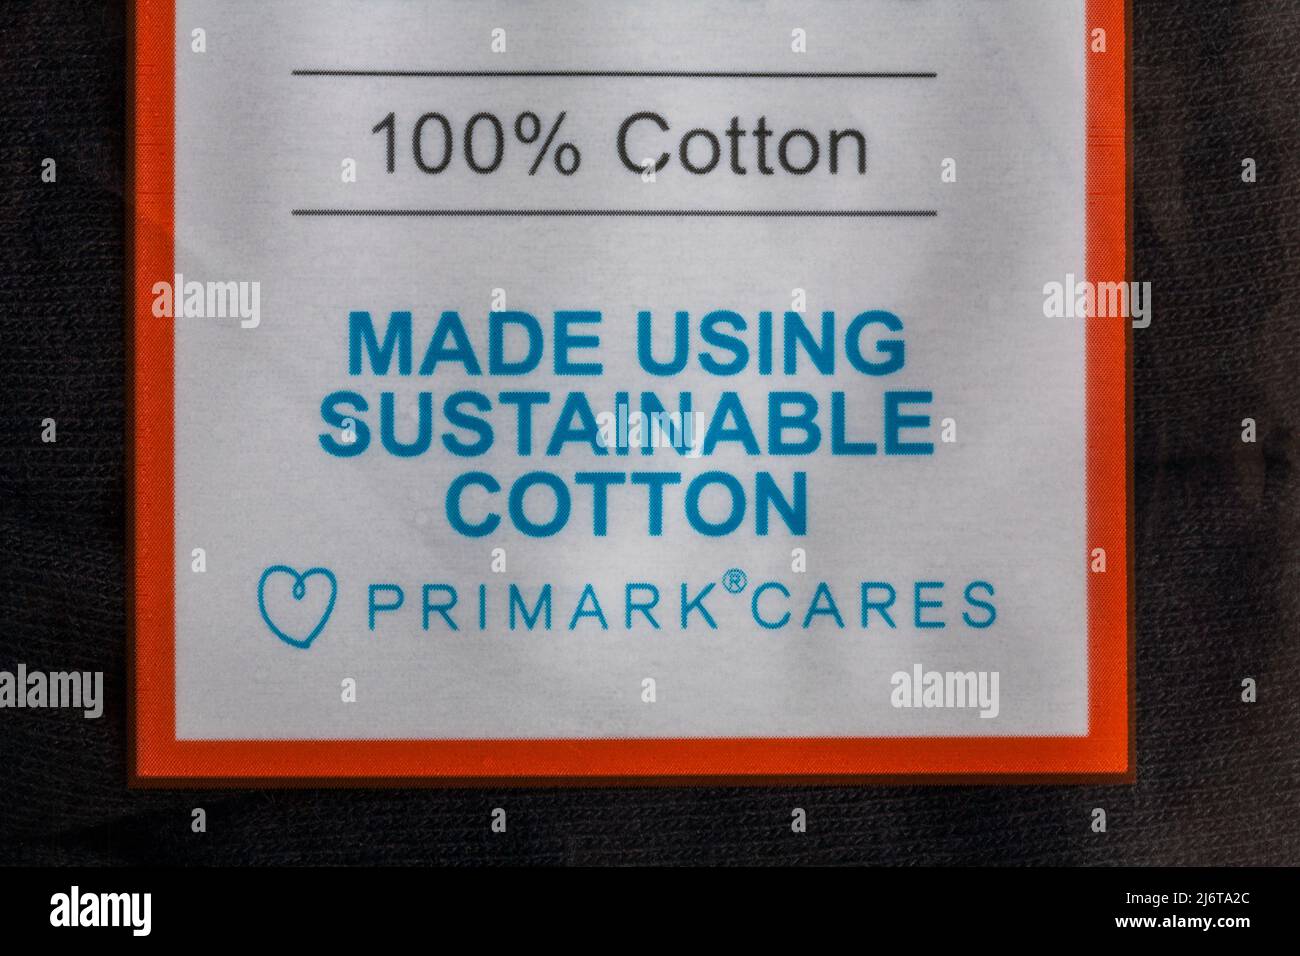 Primark Cares made using sustainable cotton label on pack of 100% cotton black knickers from Primark Stock Photo